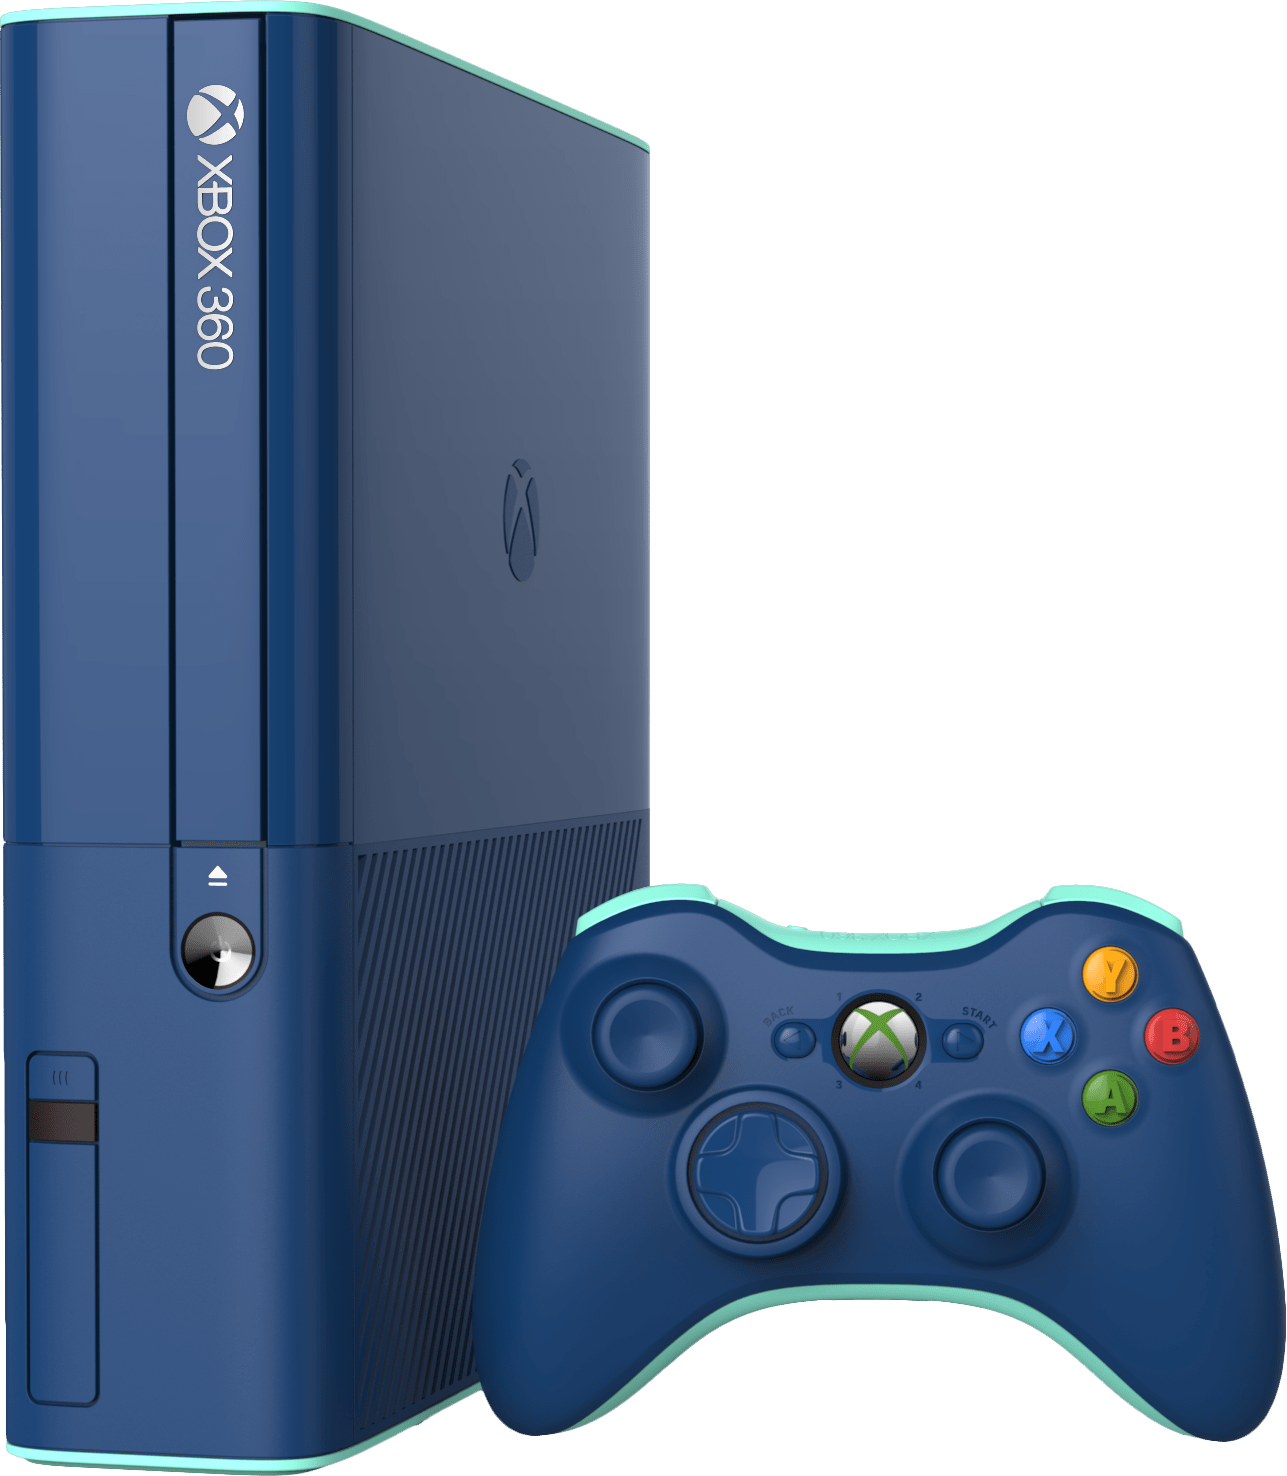 limited edition xbox 360 blue